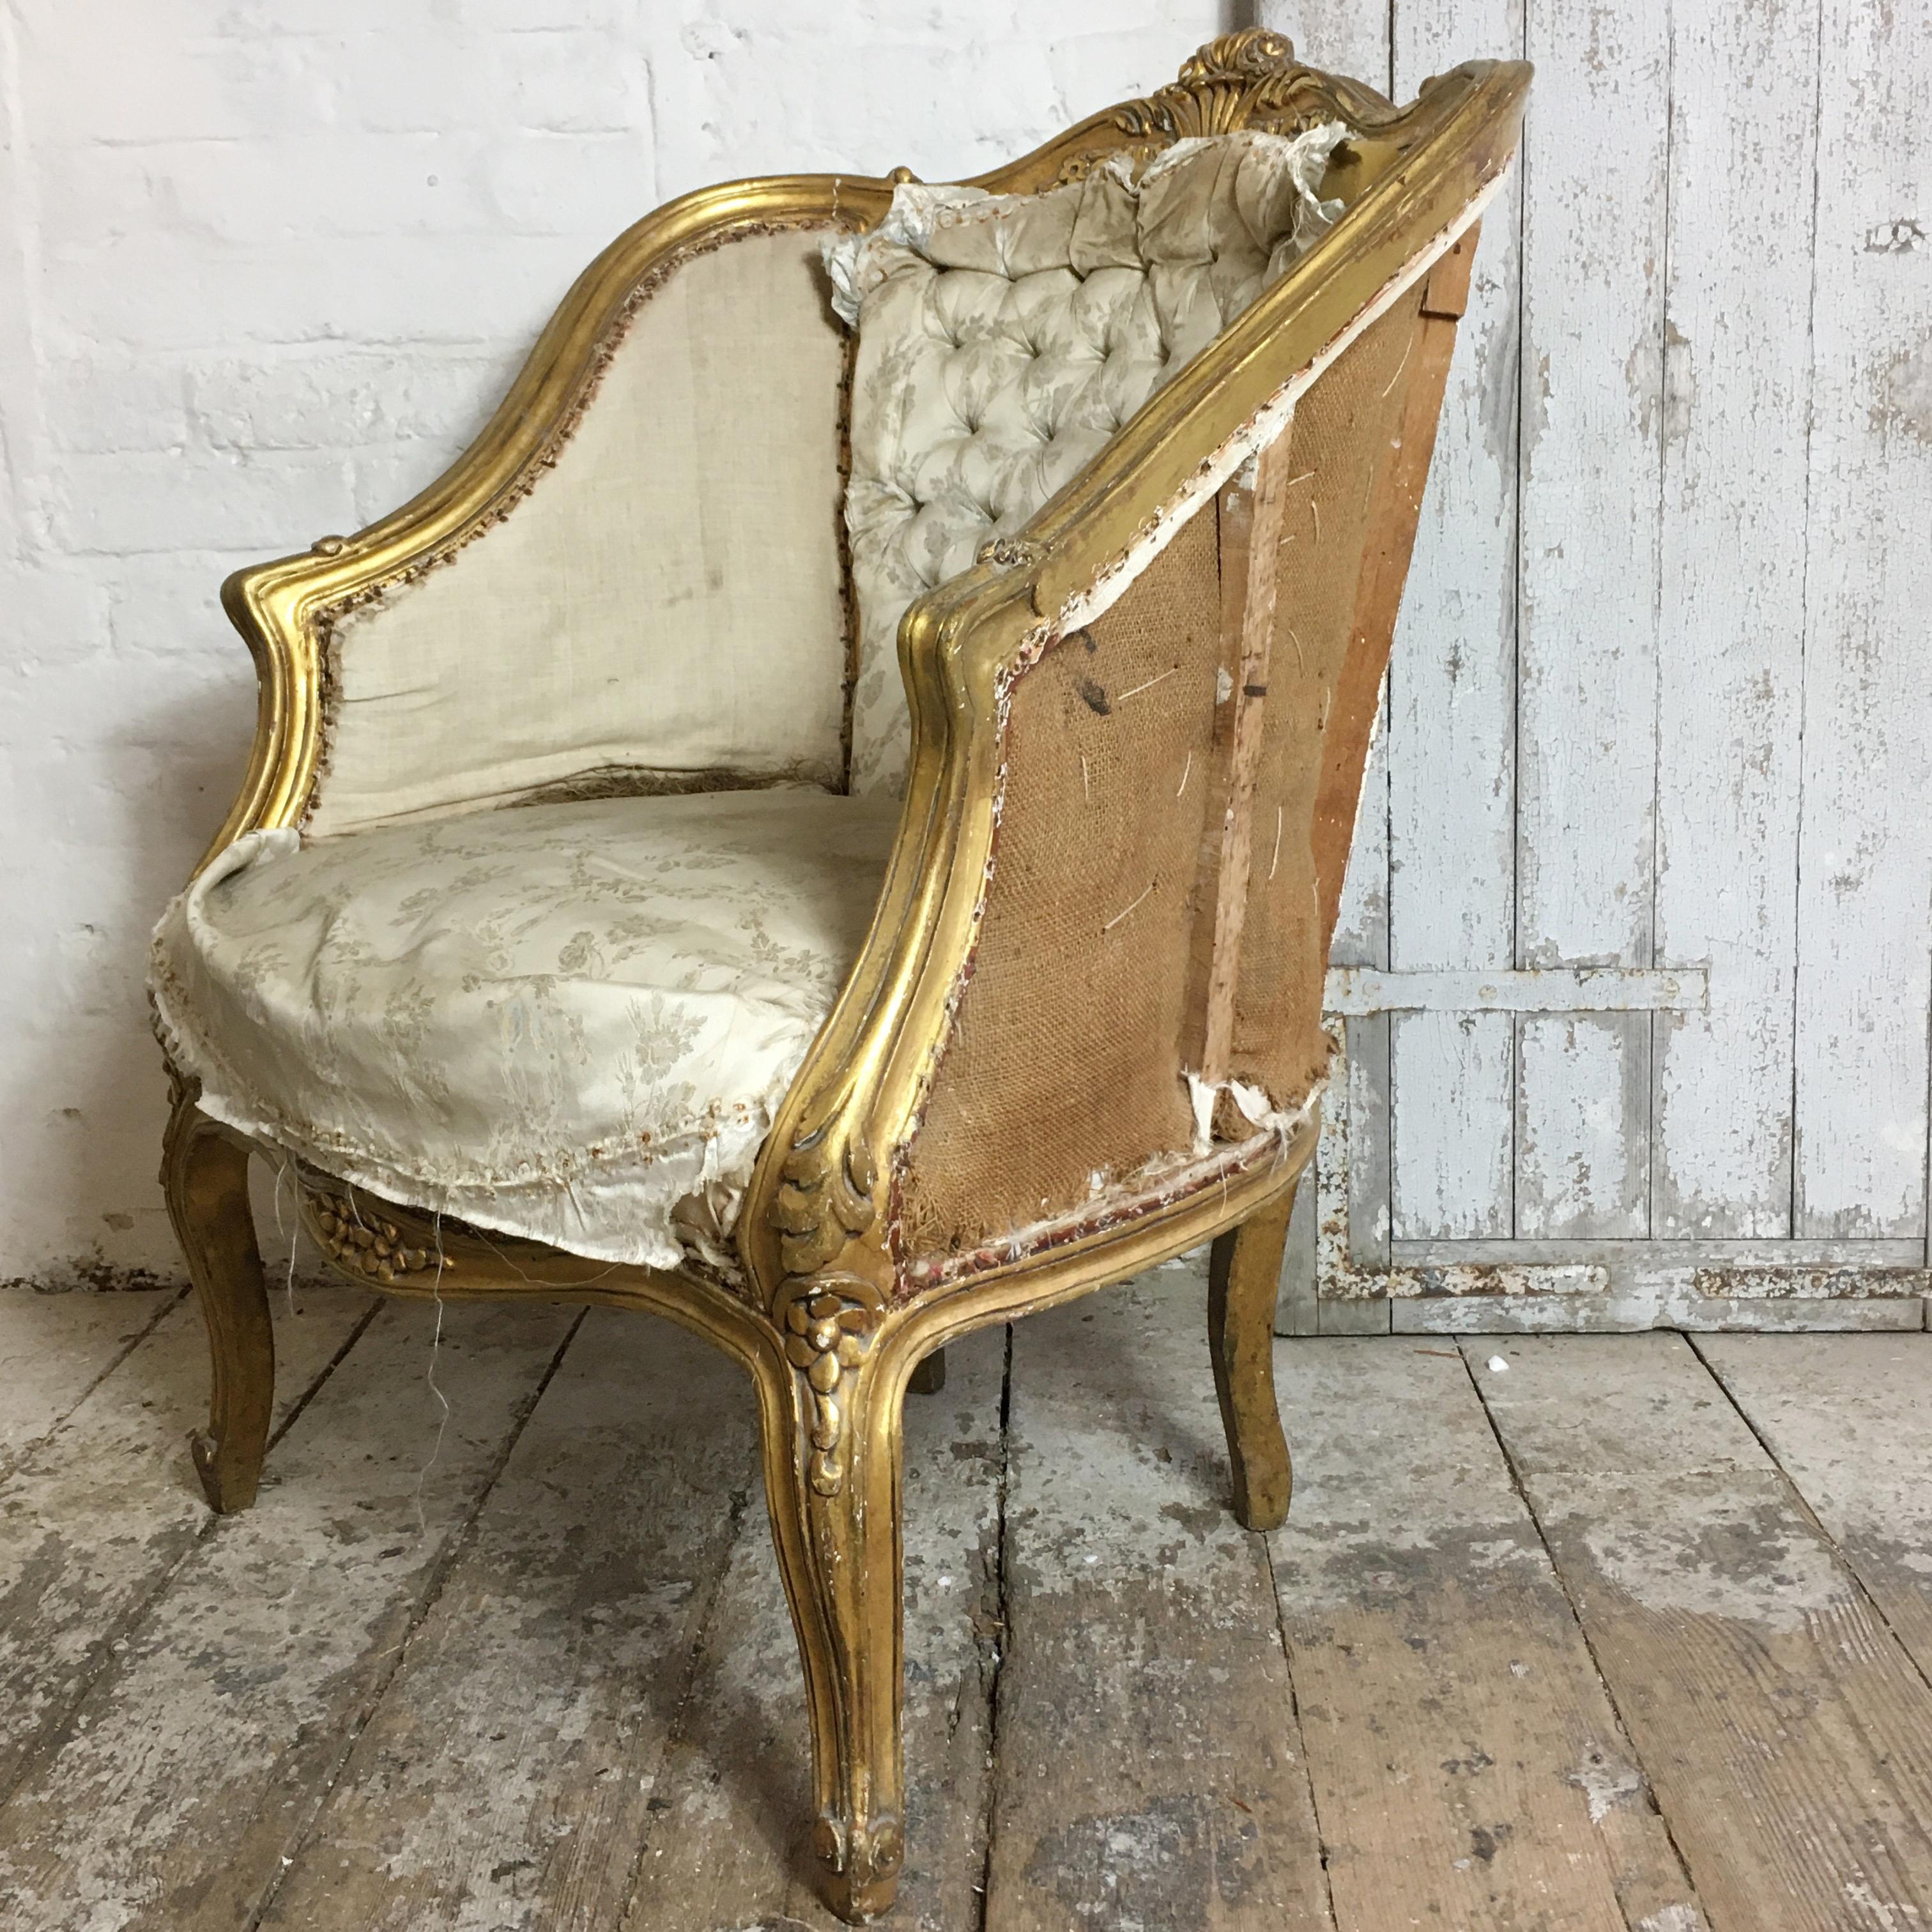 20th Century French Louis XV Style Giltwood Armchair, circa 1900 for re-upholstery